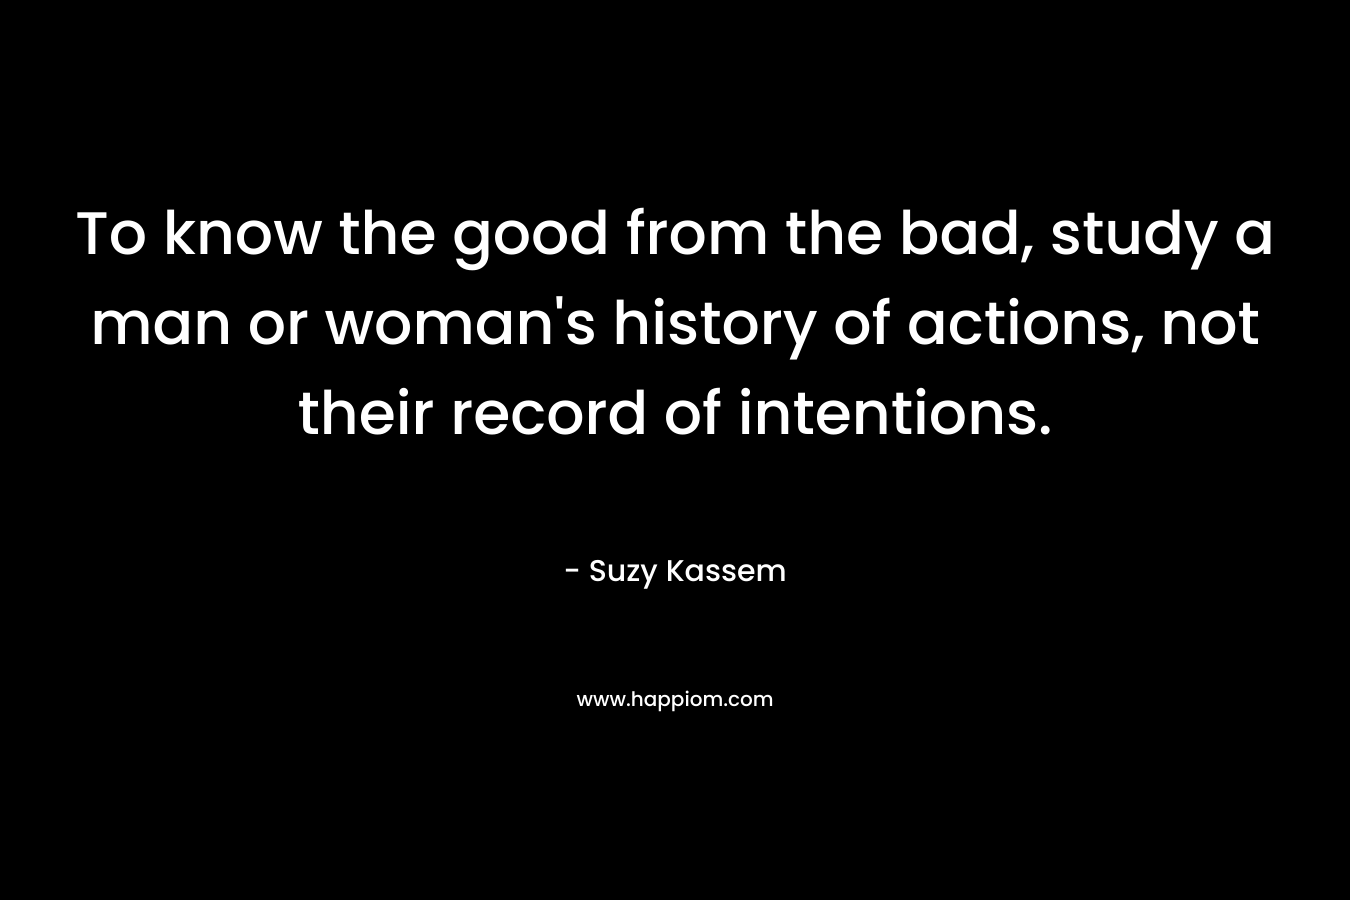 To know the good from the bad, study a man or woman's history of actions, not their record of intentions.